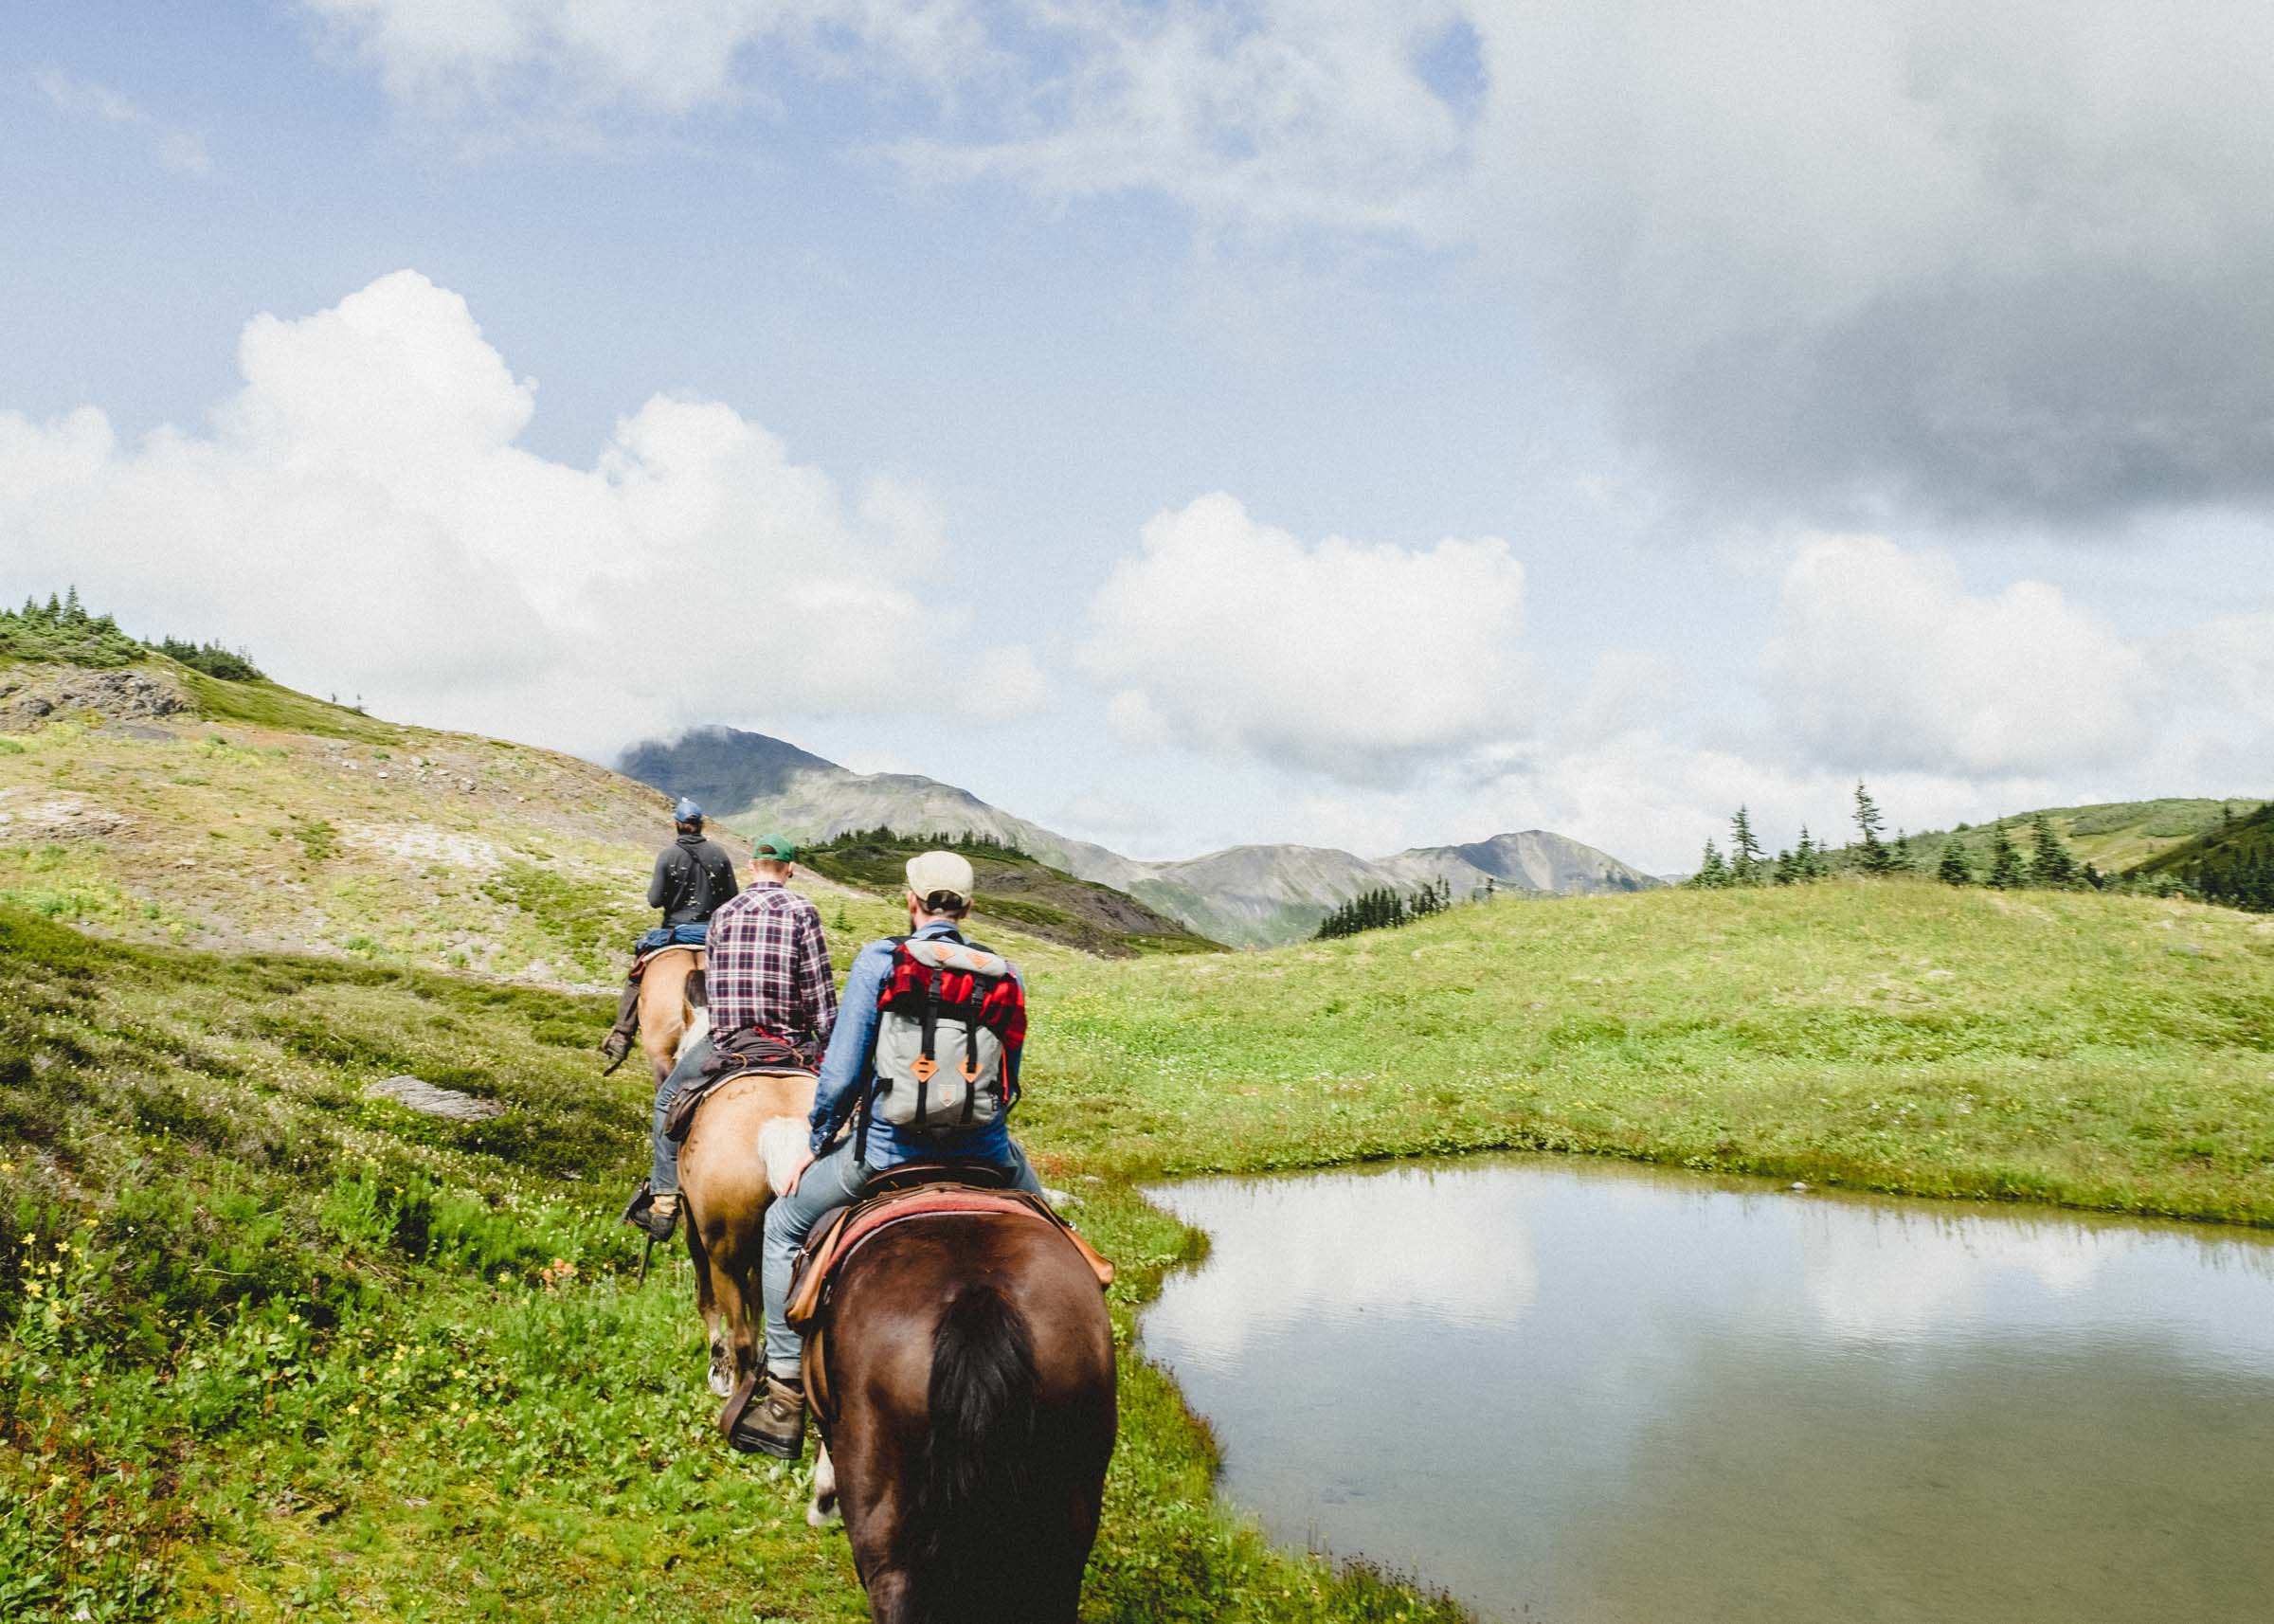 Guided horseback rides with the Bear Claw Lodge